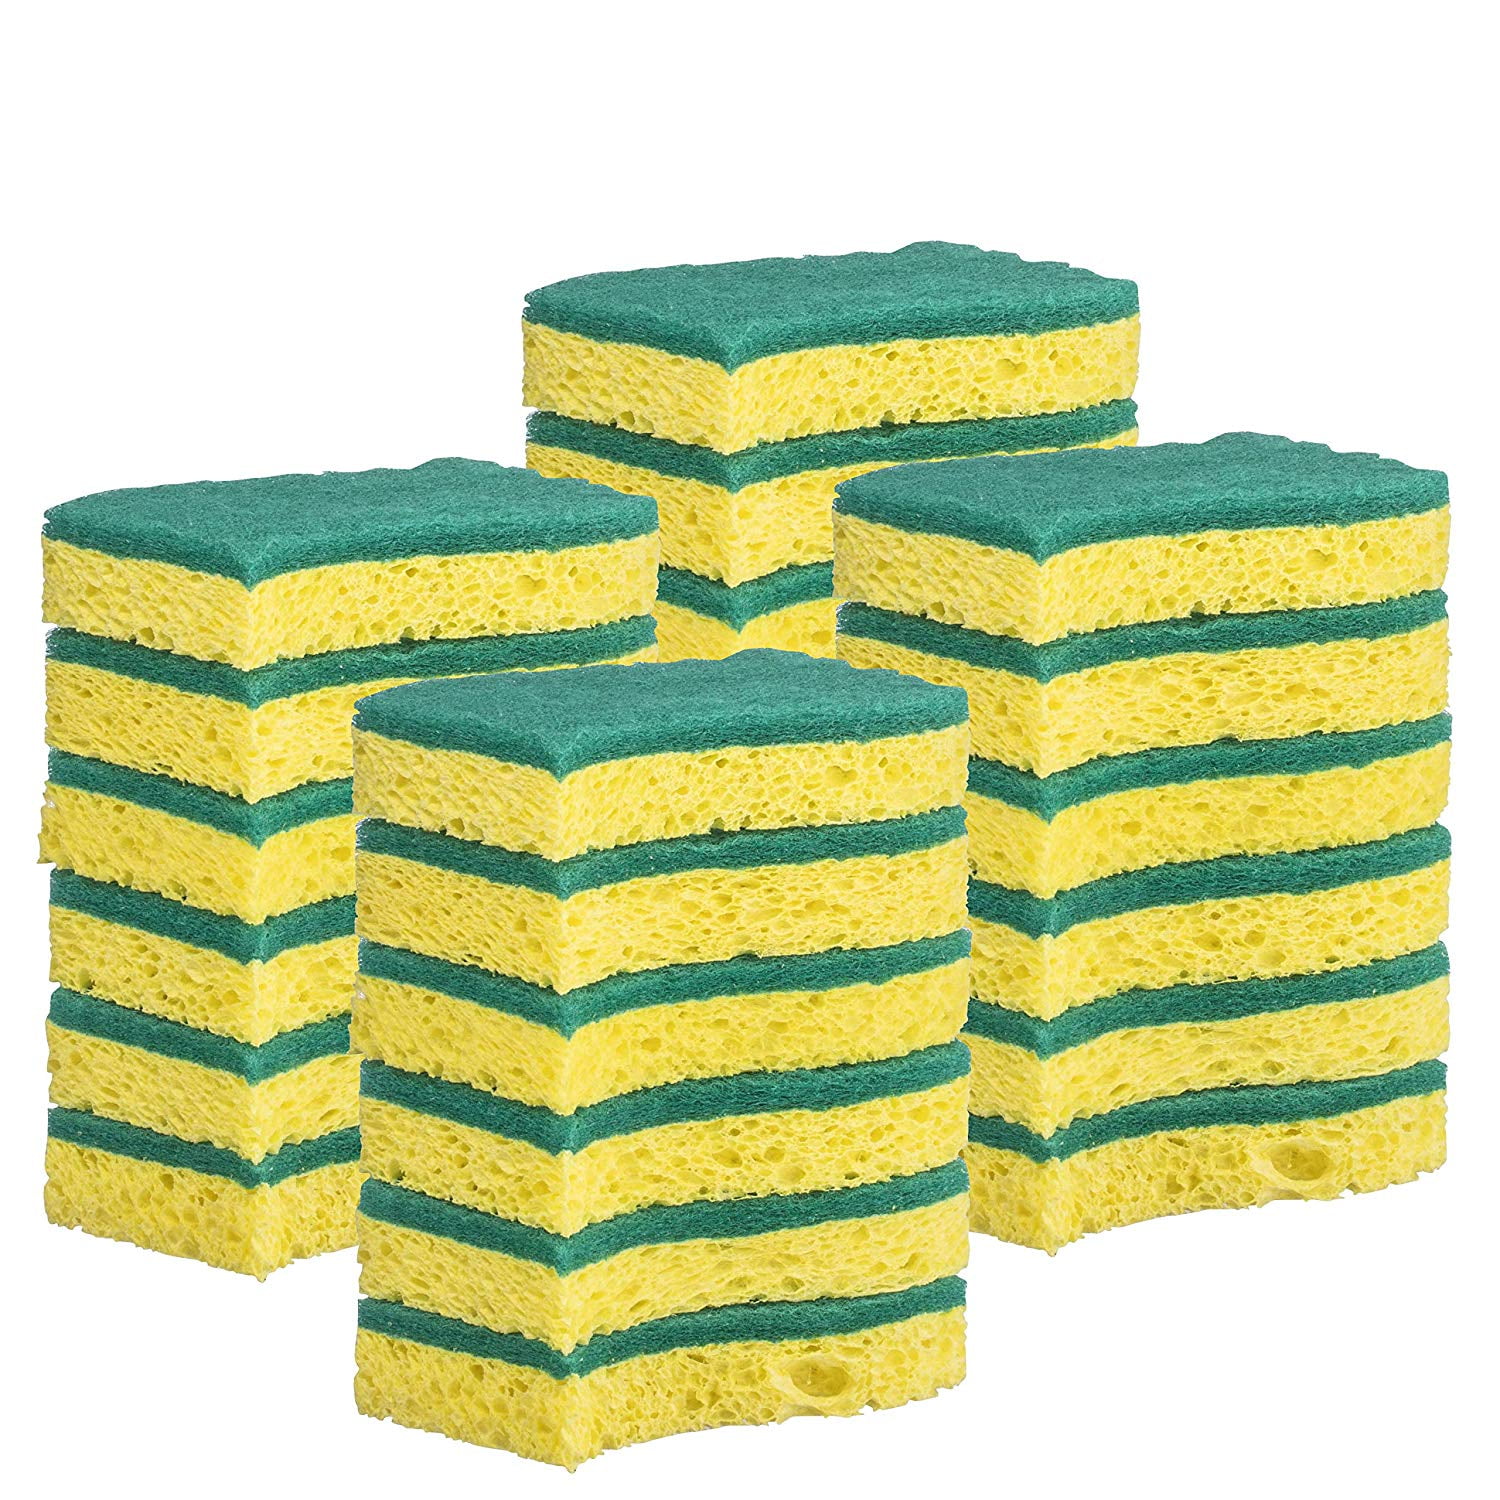 24 Pieces Oil Size 12 x 7.6 x 1.5 cm Cellulose Dish Sponge for Removing Stubborn Stain Non-Scratch on Windows Non-Stick Pan Assorted Colors Chuangdi Kitchen Cleaning Scrubbing Sponge 